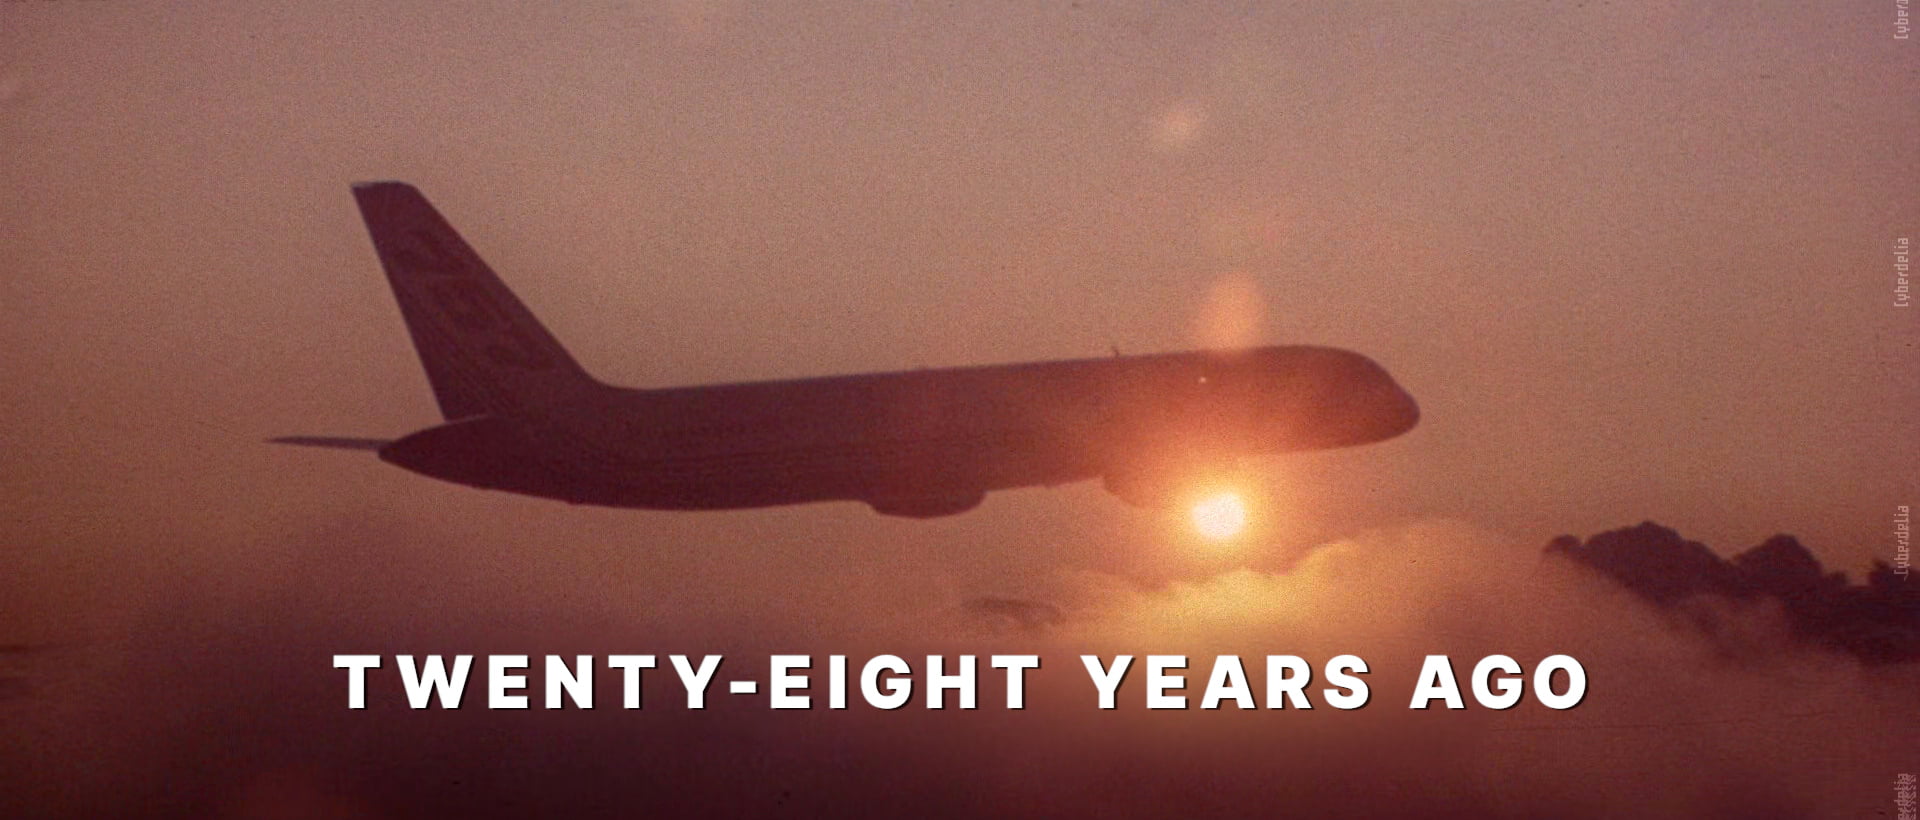 Screencap of opening scene from Hackers (1995) of an airplane flying above clouds, mostly silhouetted as the sun shines a bright orange, peeking, beaming from behind the plane. Large white sans-serif text below the plain caption says: TWENTY-EIGHT YEARS AGO.